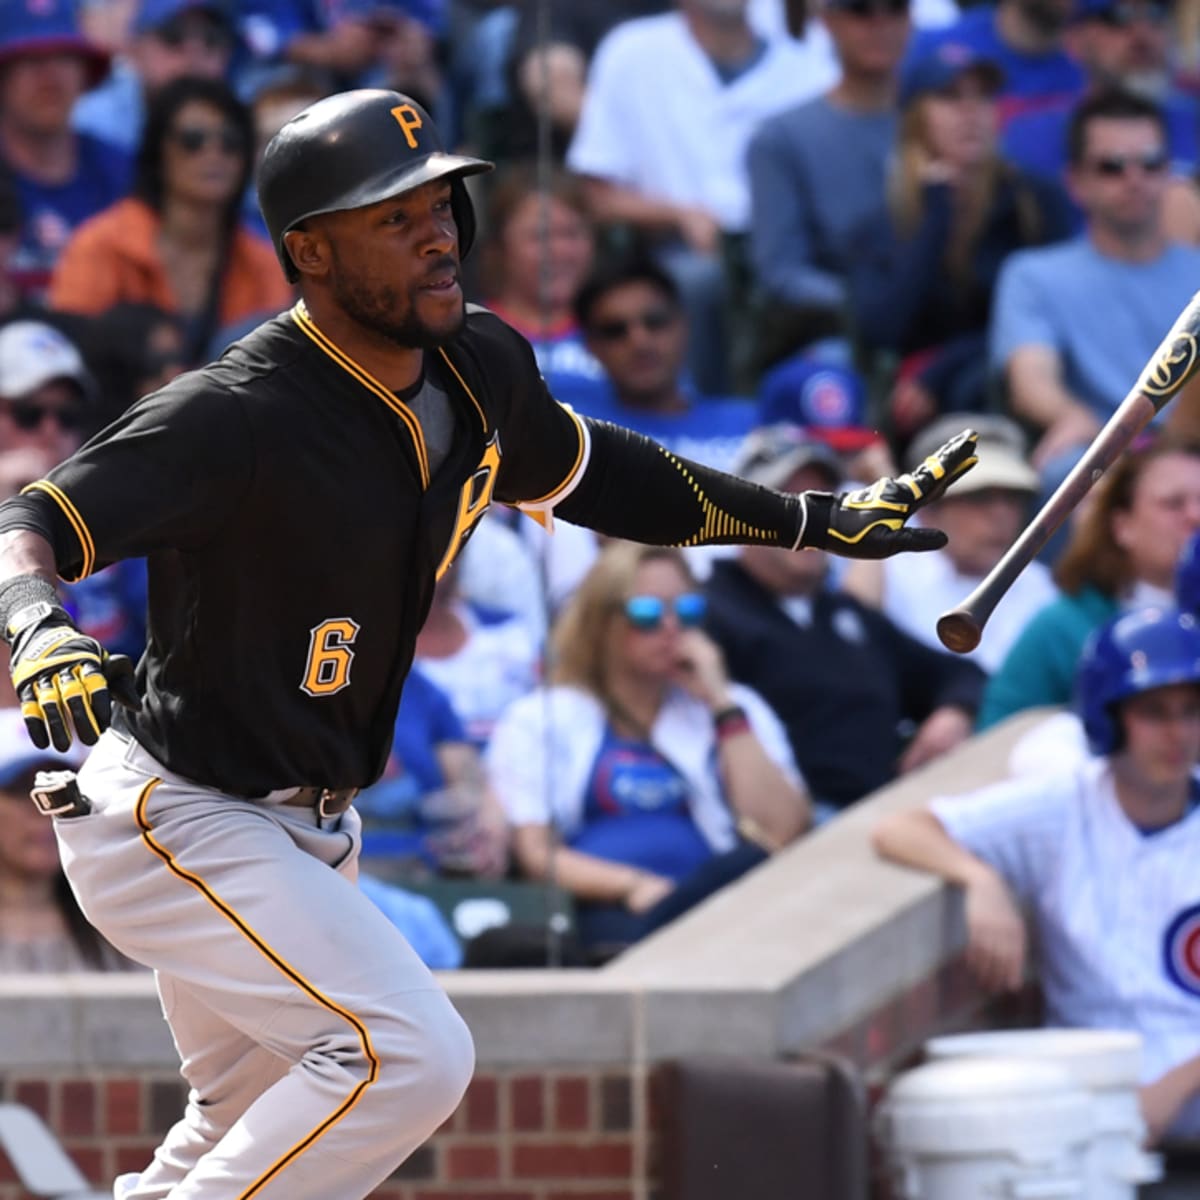 Starling Marte's suspension shows current PED ban is too lenient